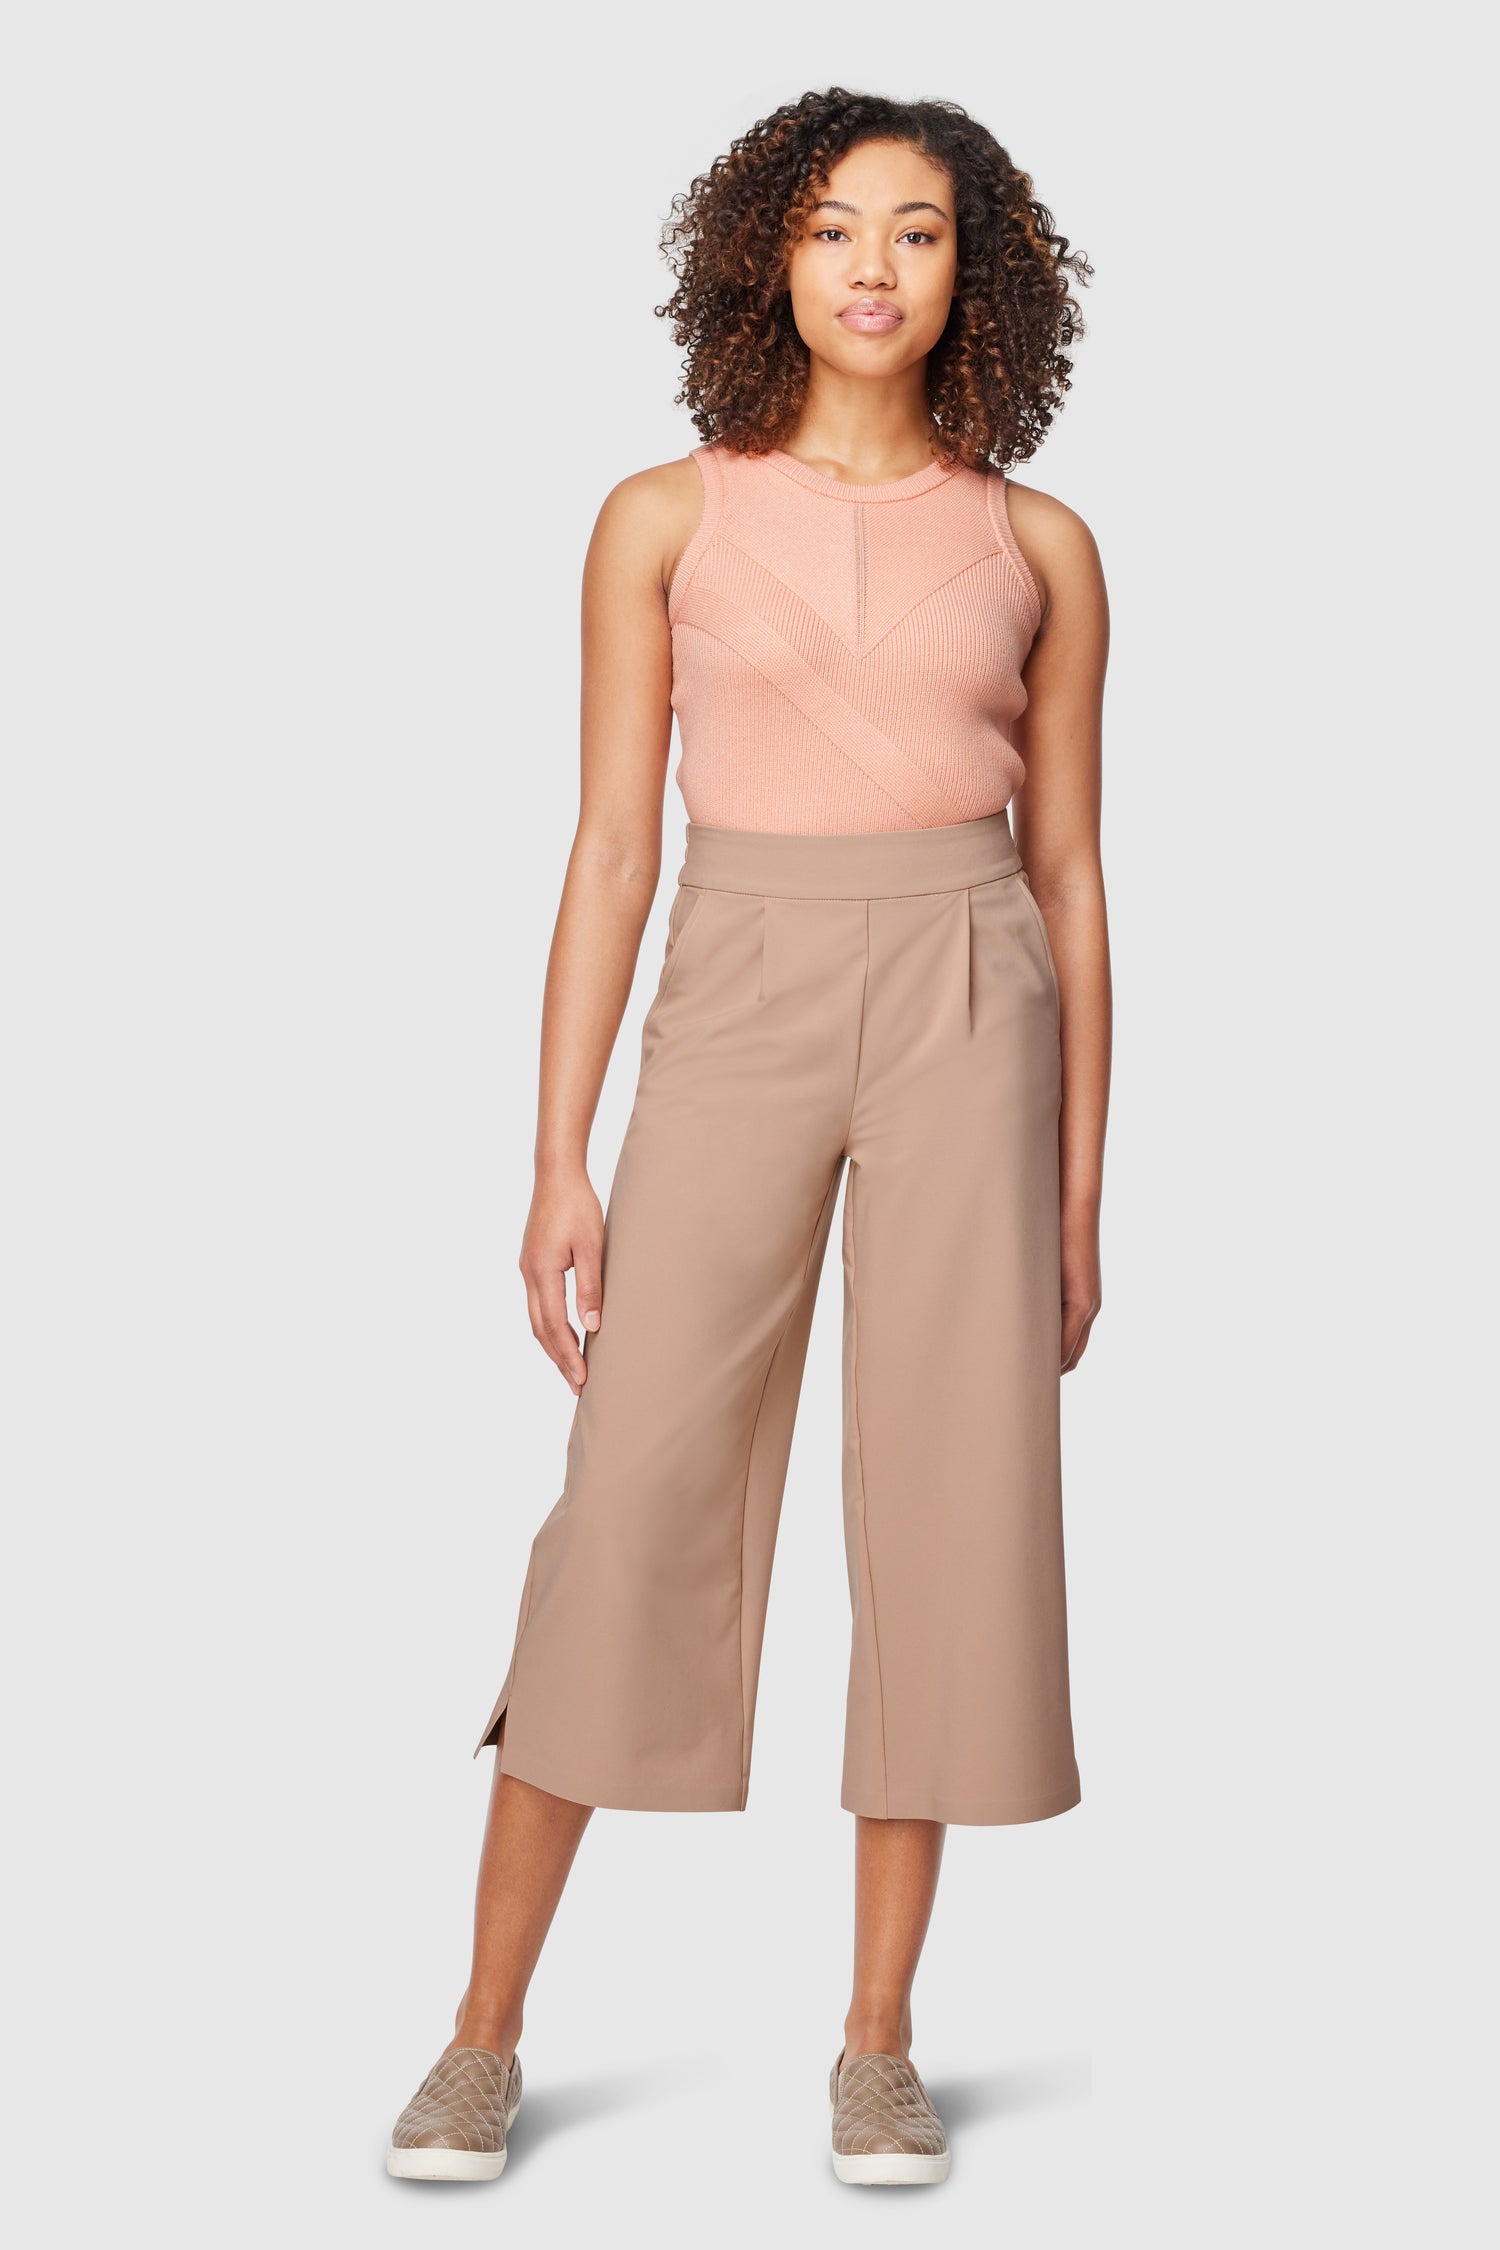 Friday FWD Women's Cropped Woven Pant - BEST SELLING